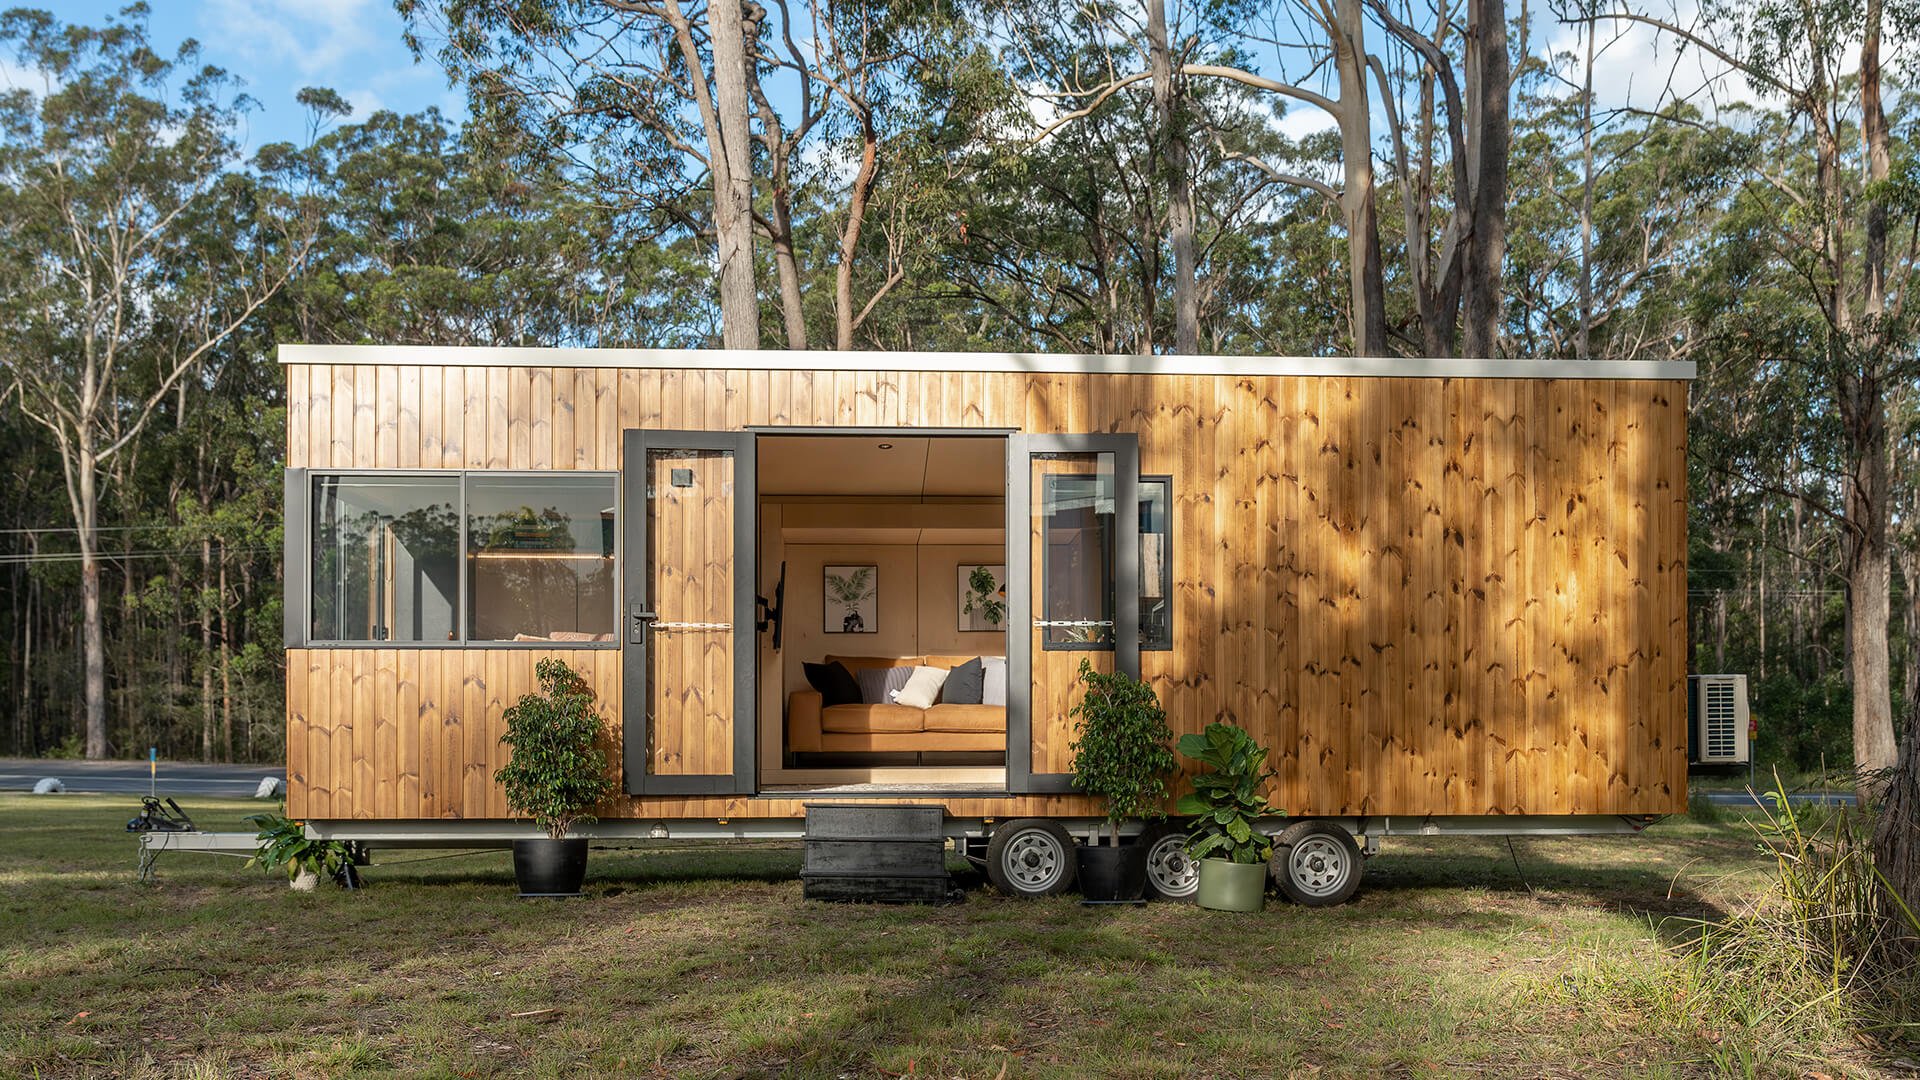 Minimalism with Sustainable Tiny House Materials